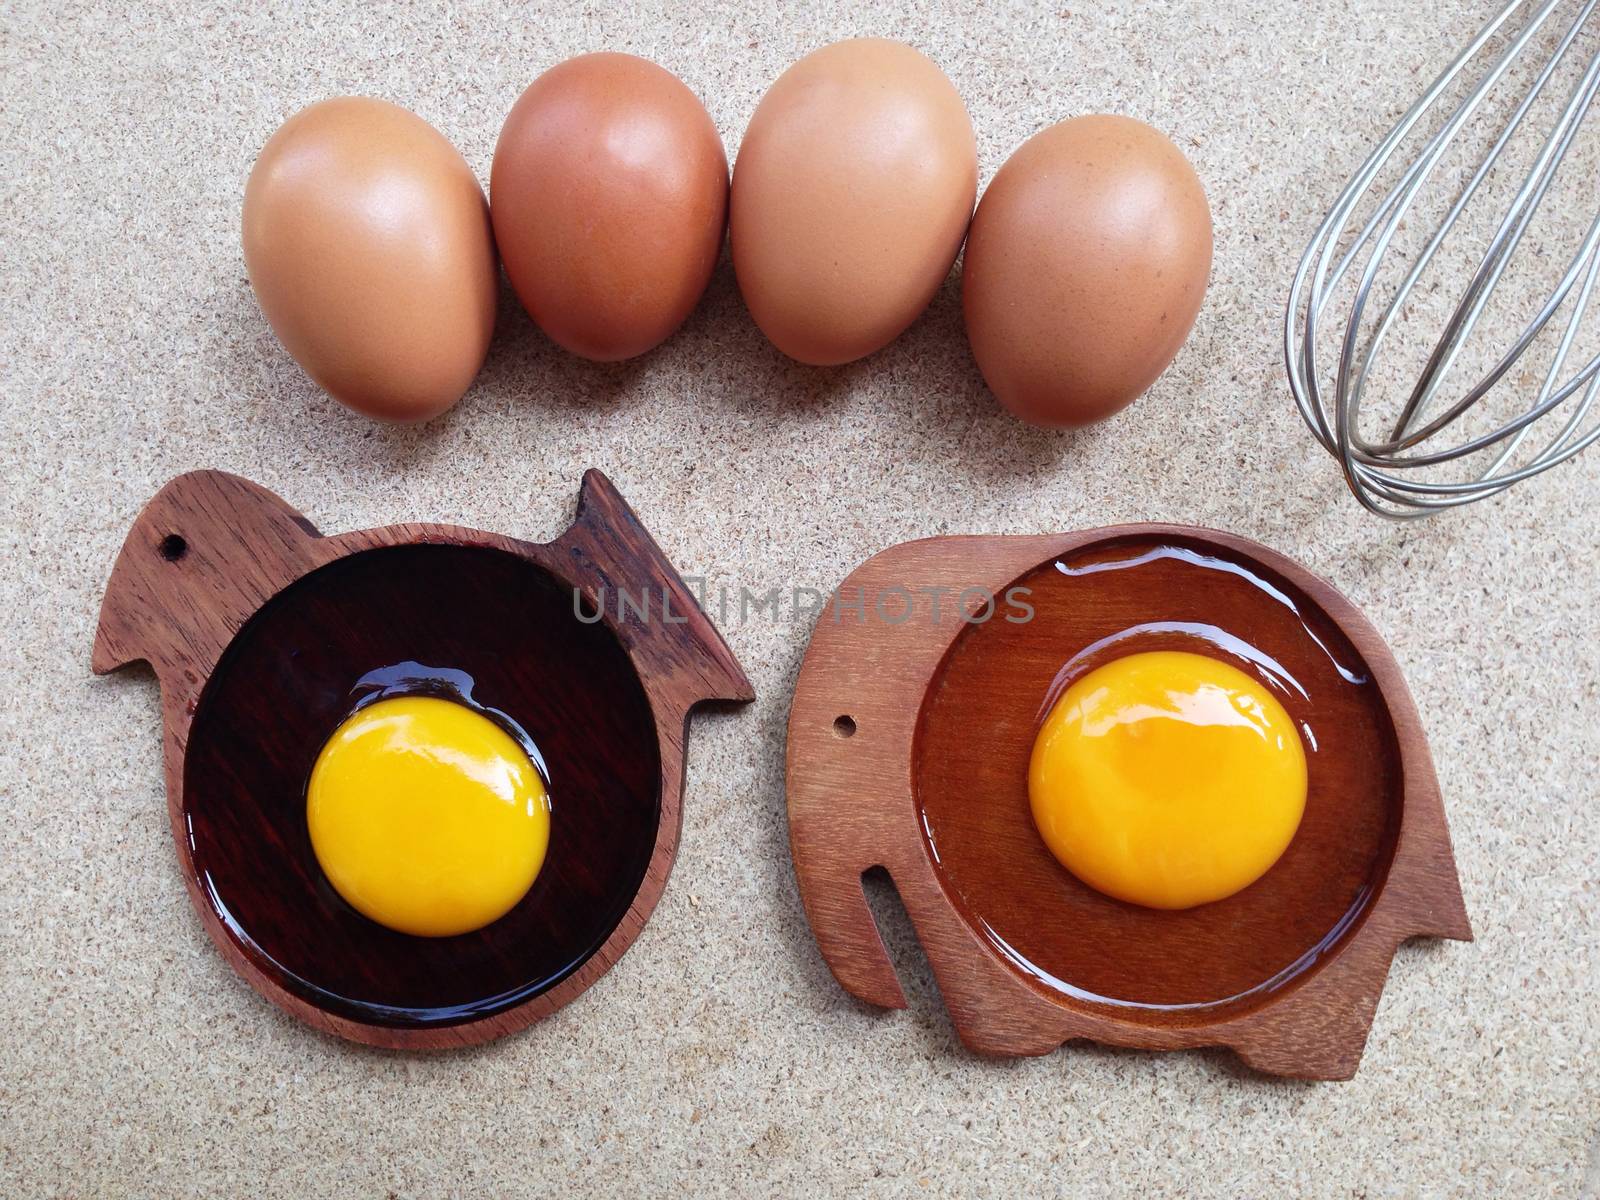 Egg yolk on wooden chicken shaped saucer and yolk egg on wooden elephant shaped saucer with eggs and egg whisk on plywood